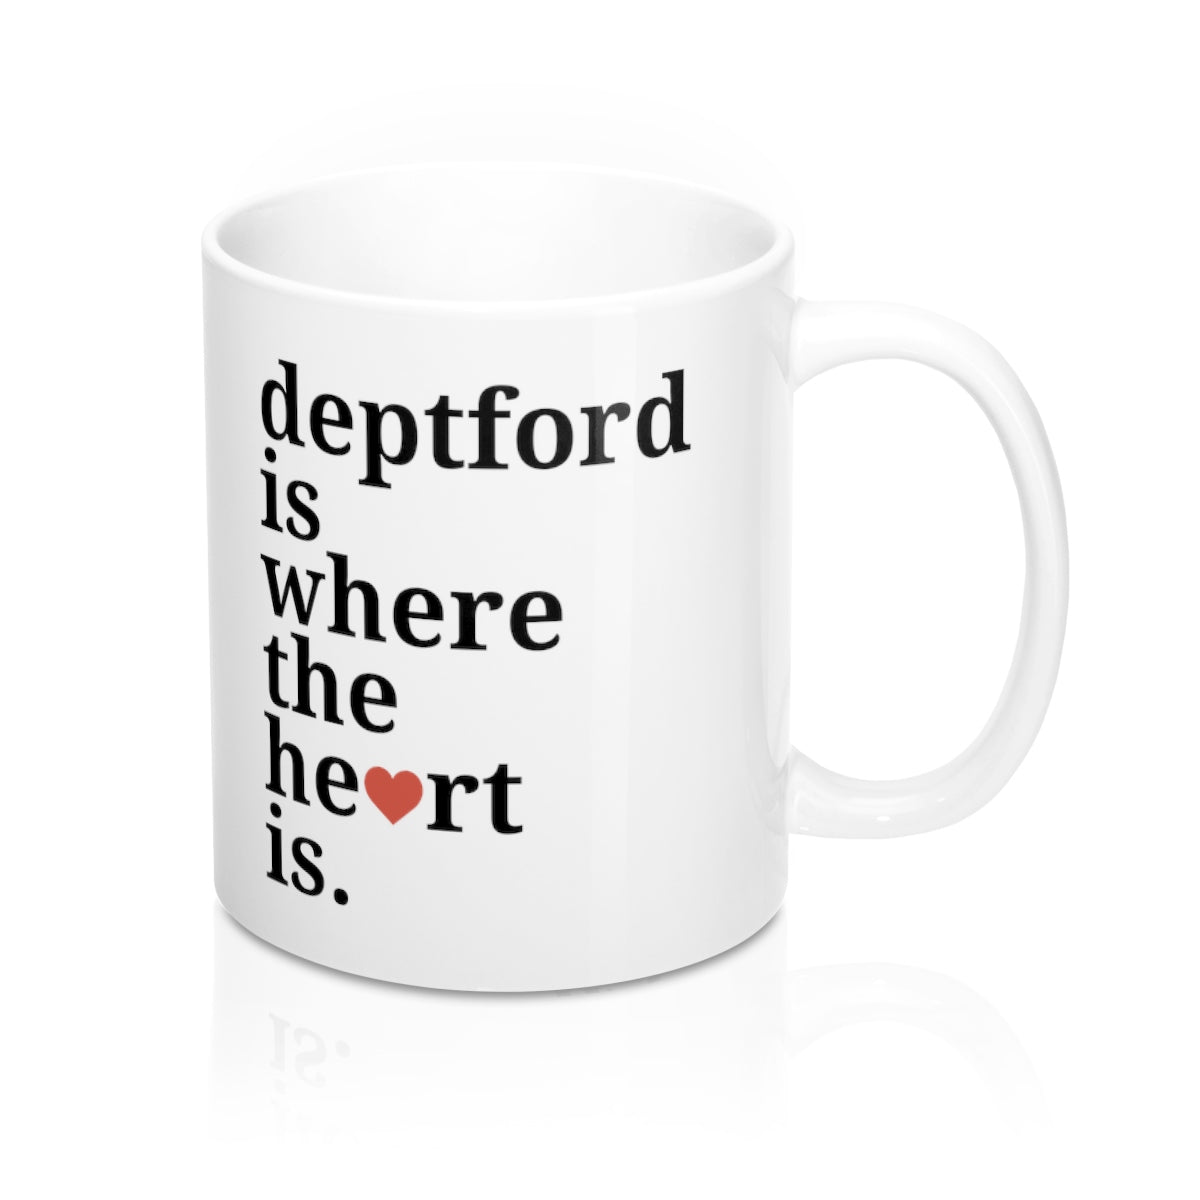 Deptford Is Where The Heart Is Mug